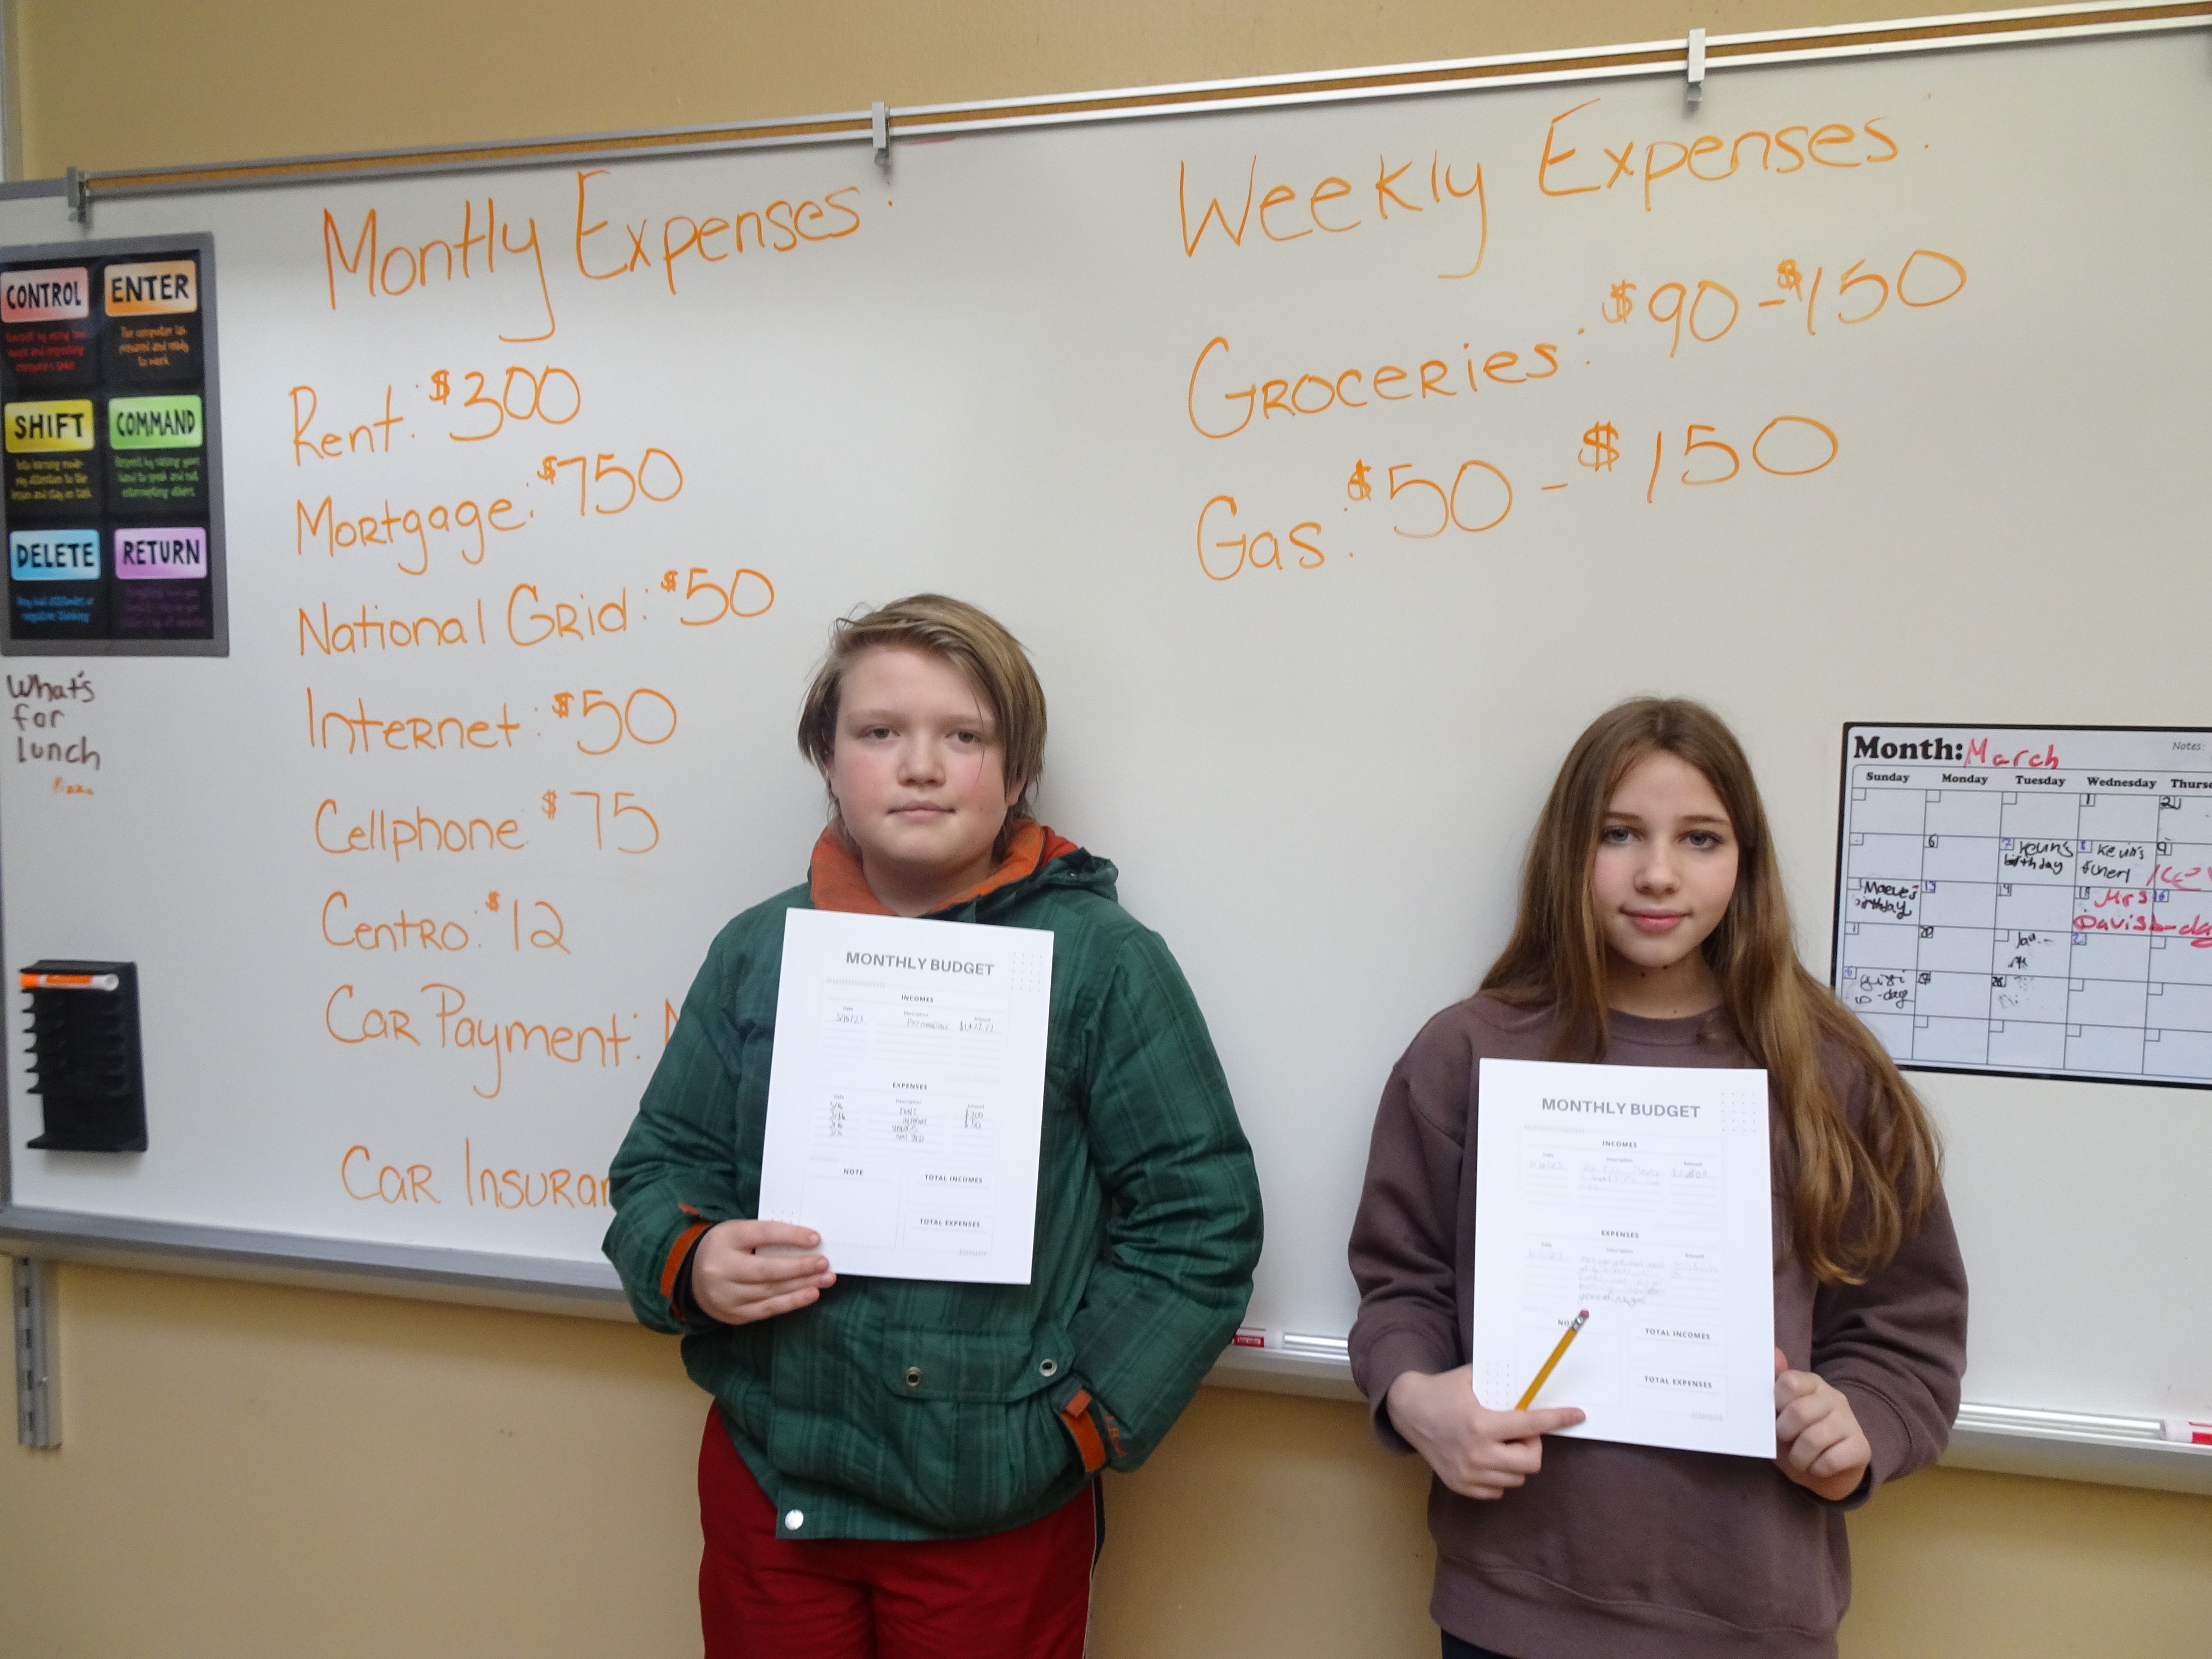 This is a photo of two Syracuse Latin students, each holding a sheet with their monthly budget, standing in front of a white board filled with a list of various household costs.